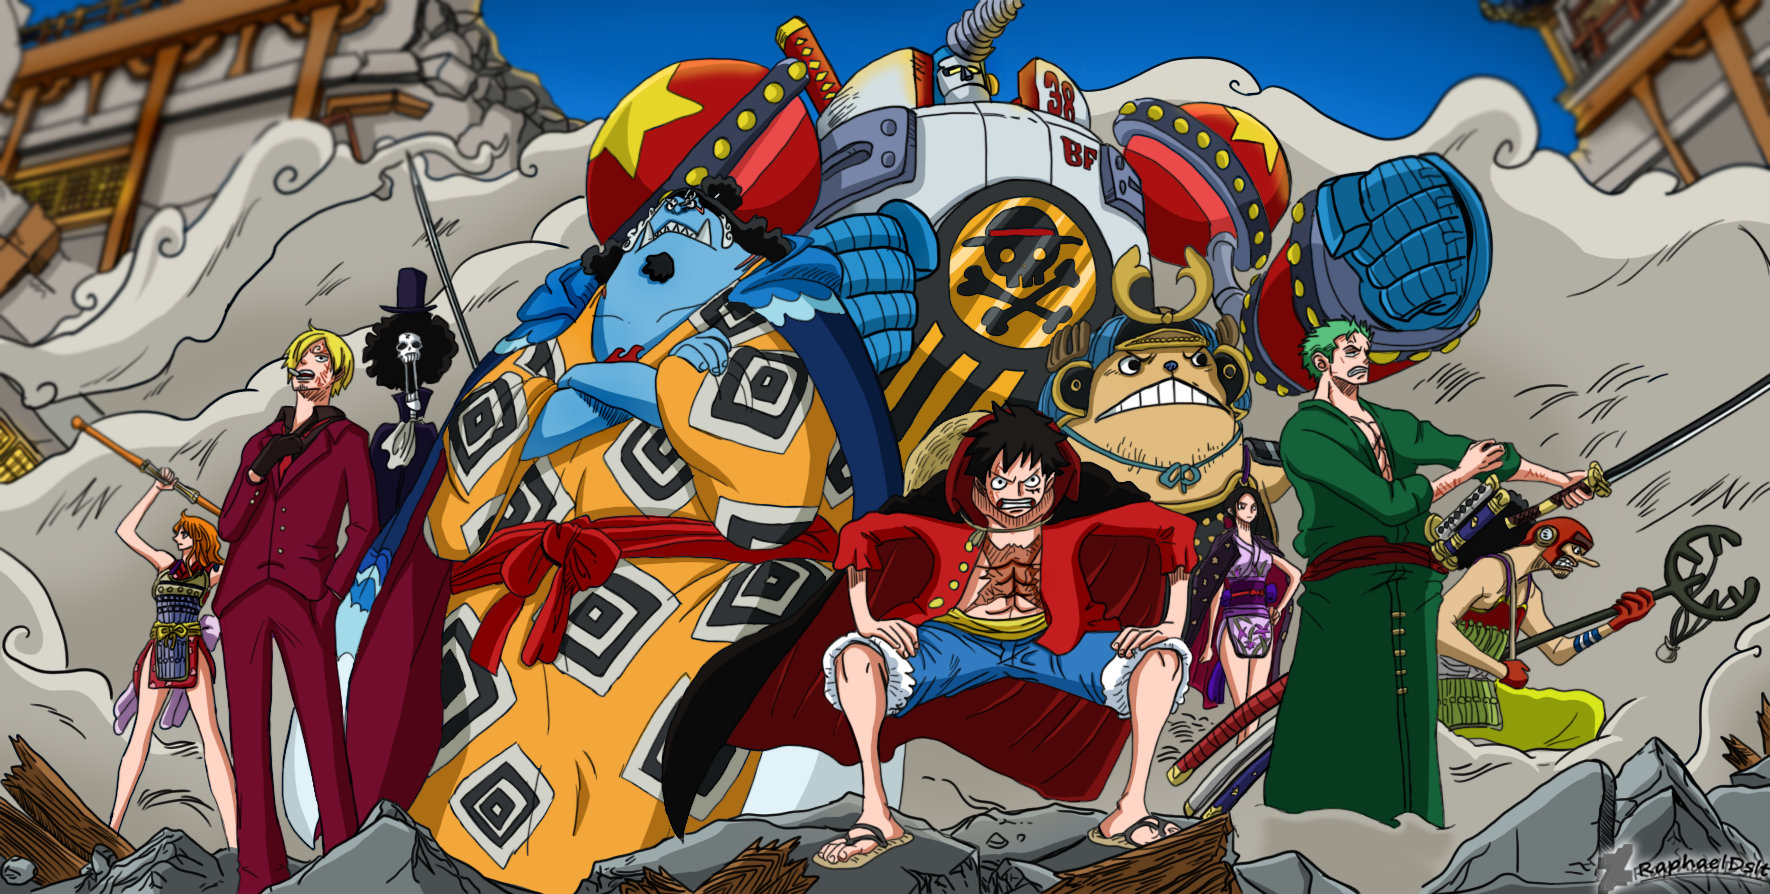 One Piece Opening 24 - Straw Hat Pirates (2) by ThonyGrpl on DeviantArt